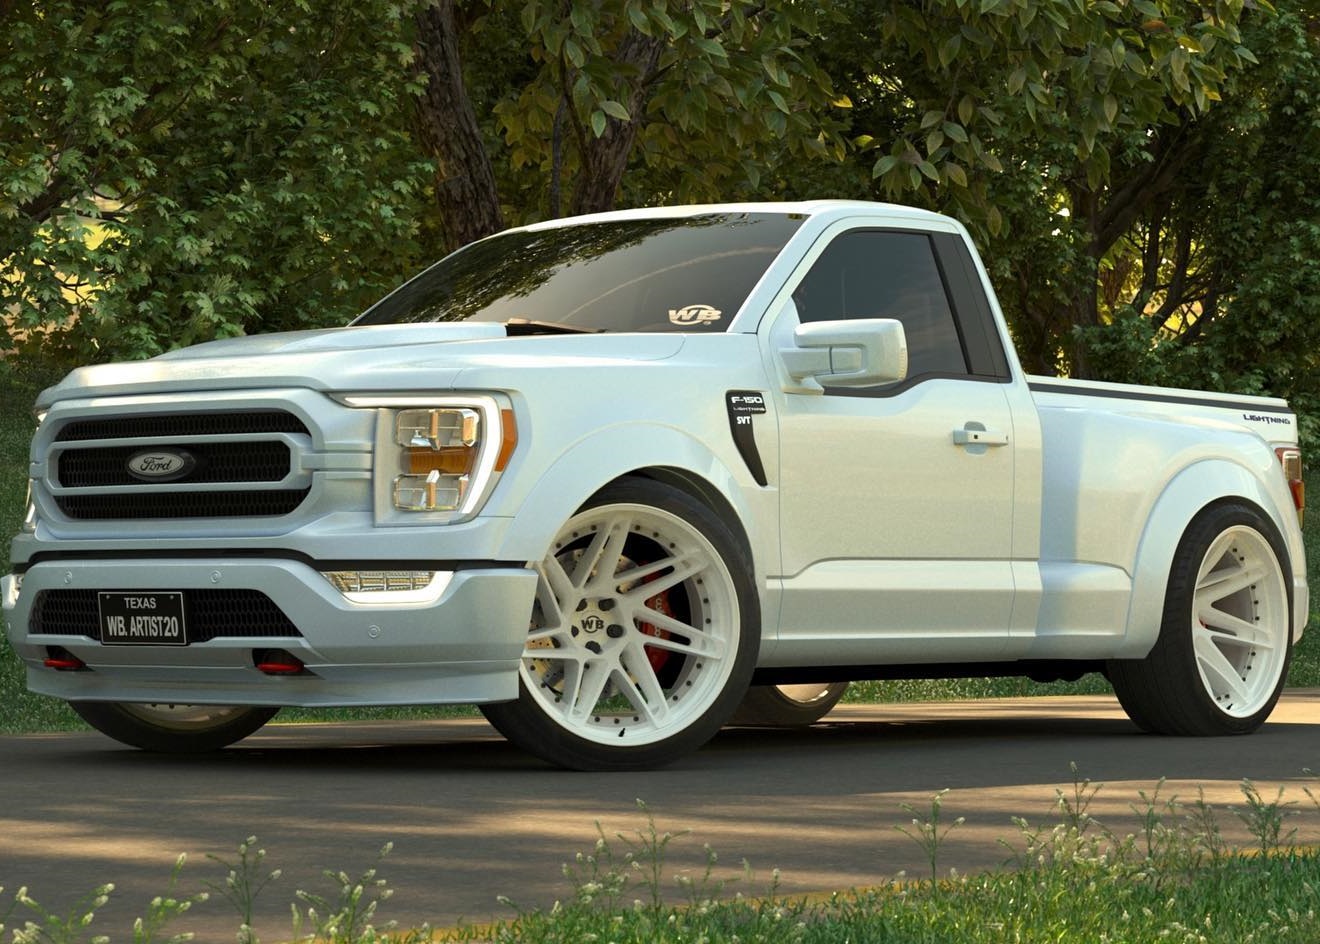 virtual ford f 150 flareside lightning discards ev style goes back to an svt life 202254 1 1